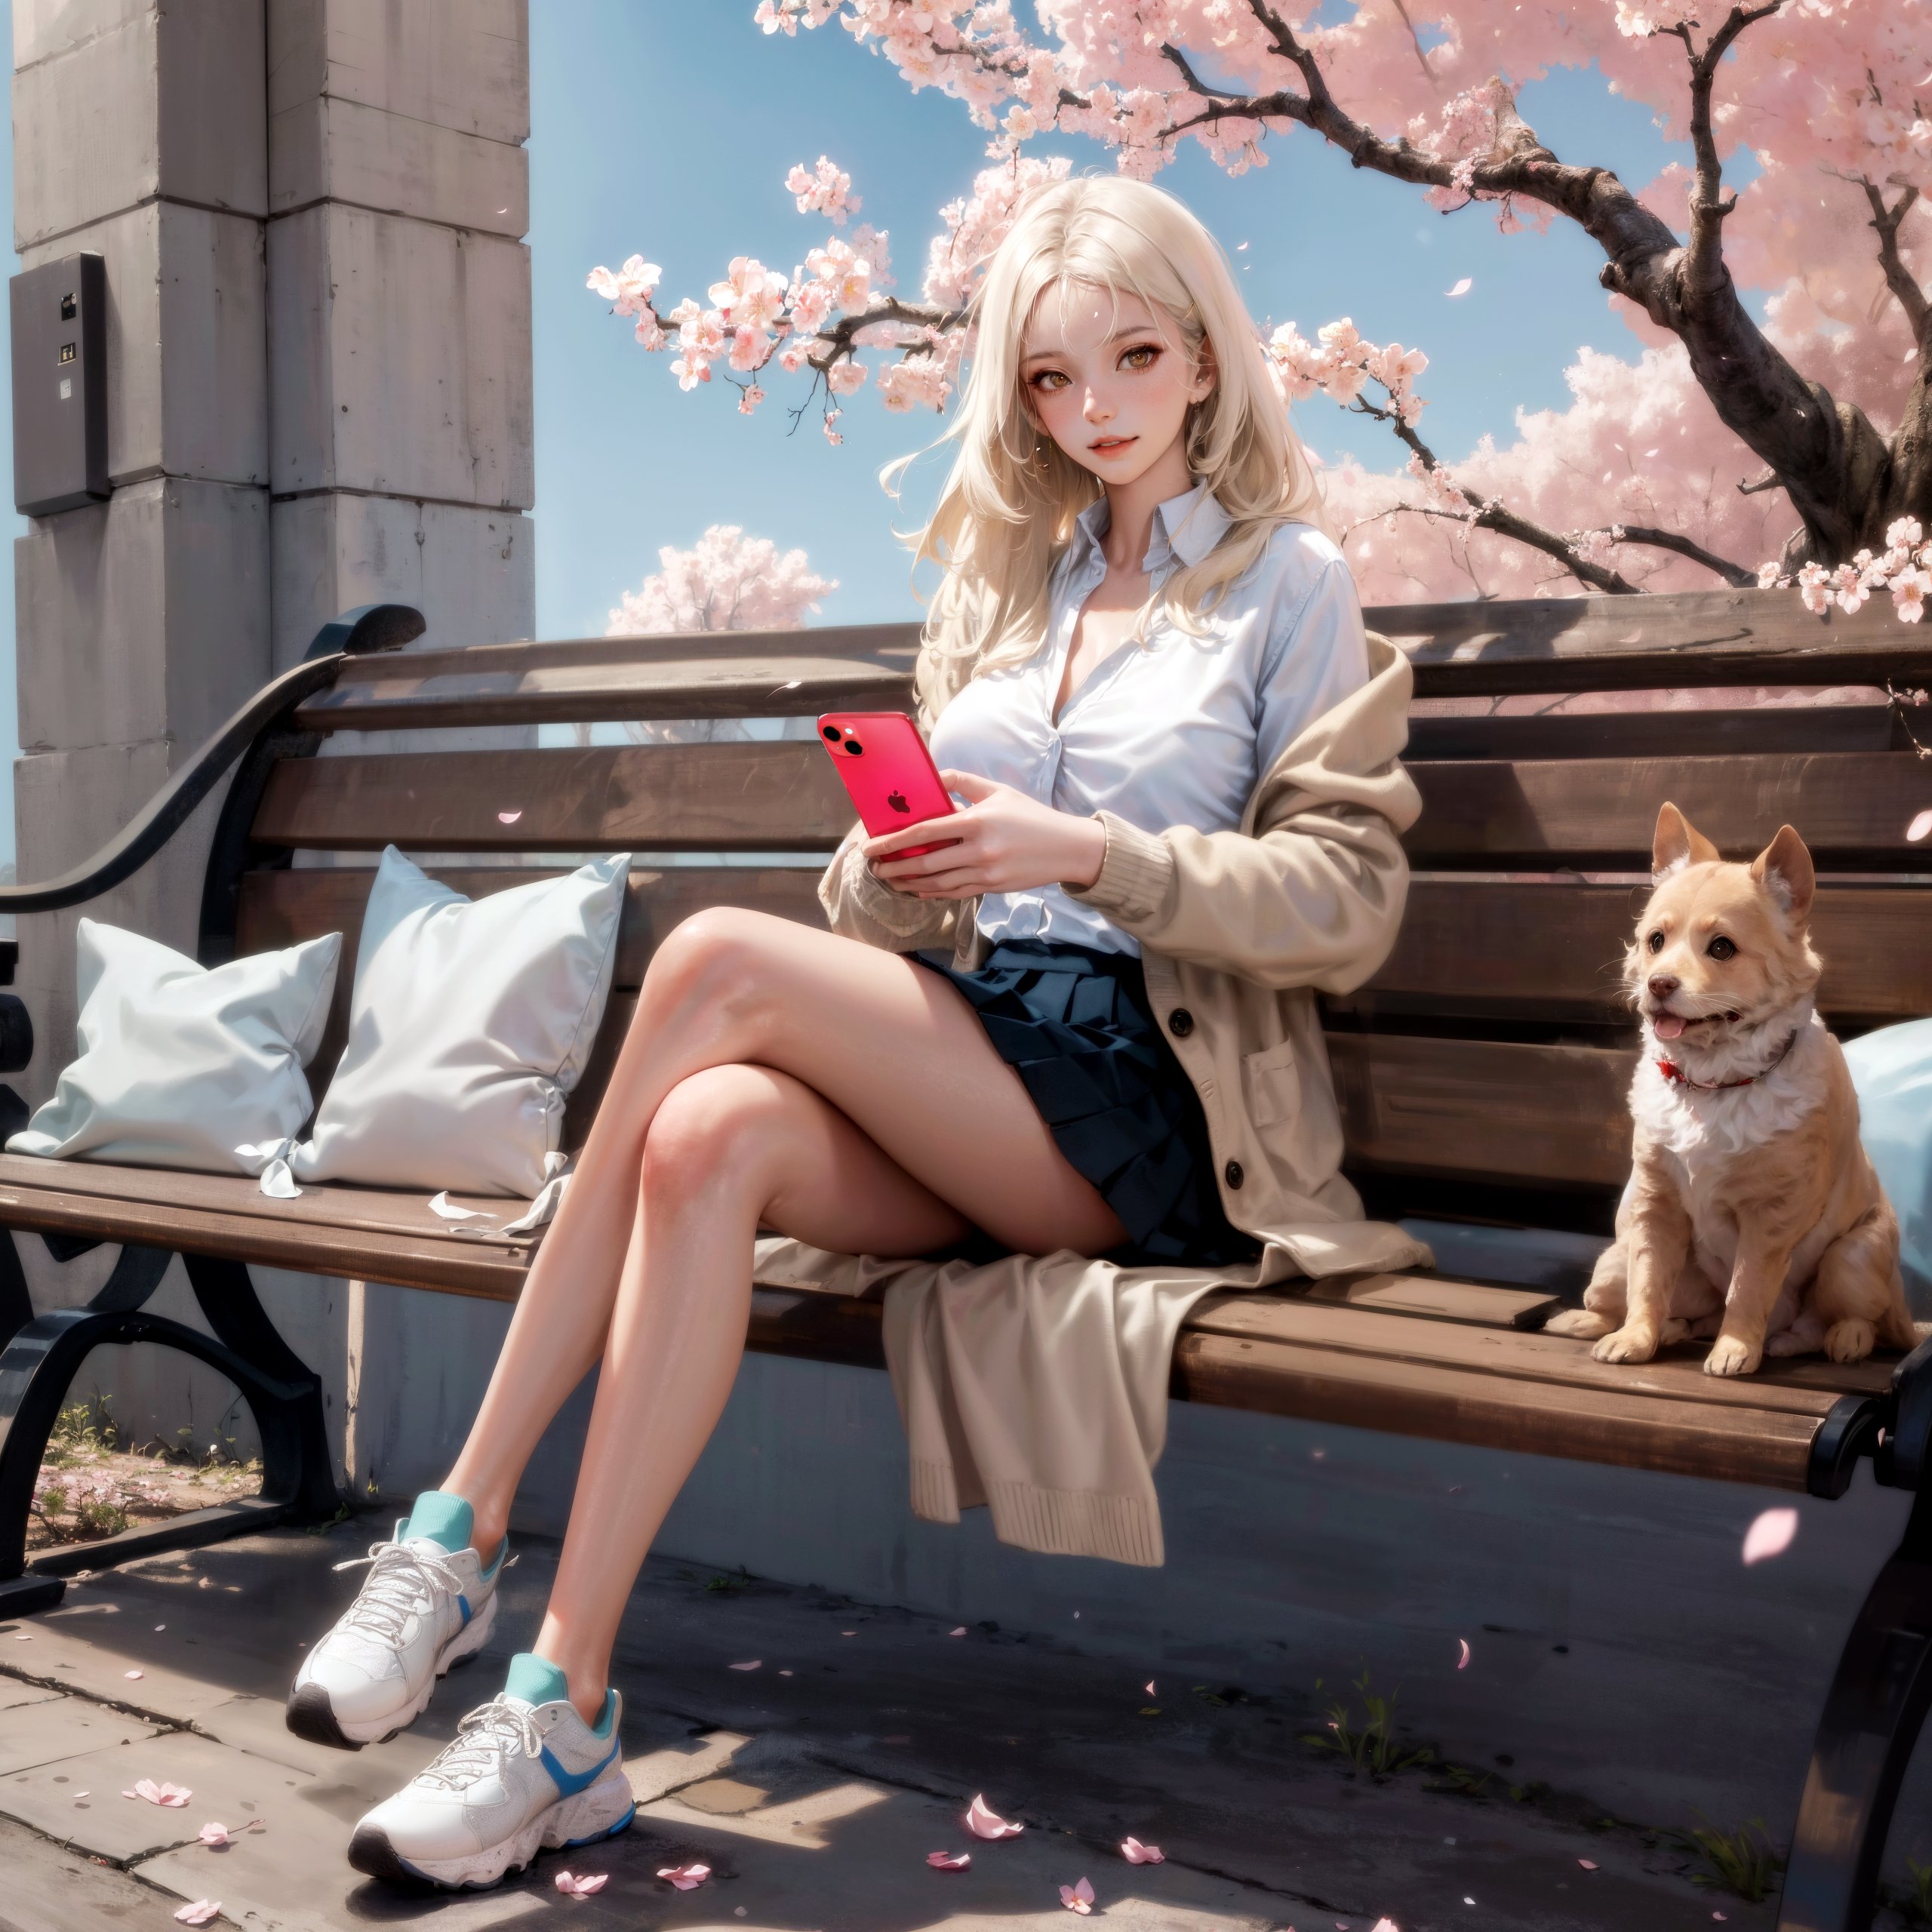 Stable Diffusion Ai Art Blonde Women Dog Animals Bench Trees Sky Clouds Cherry Blossom Skirt White S 2560x2560